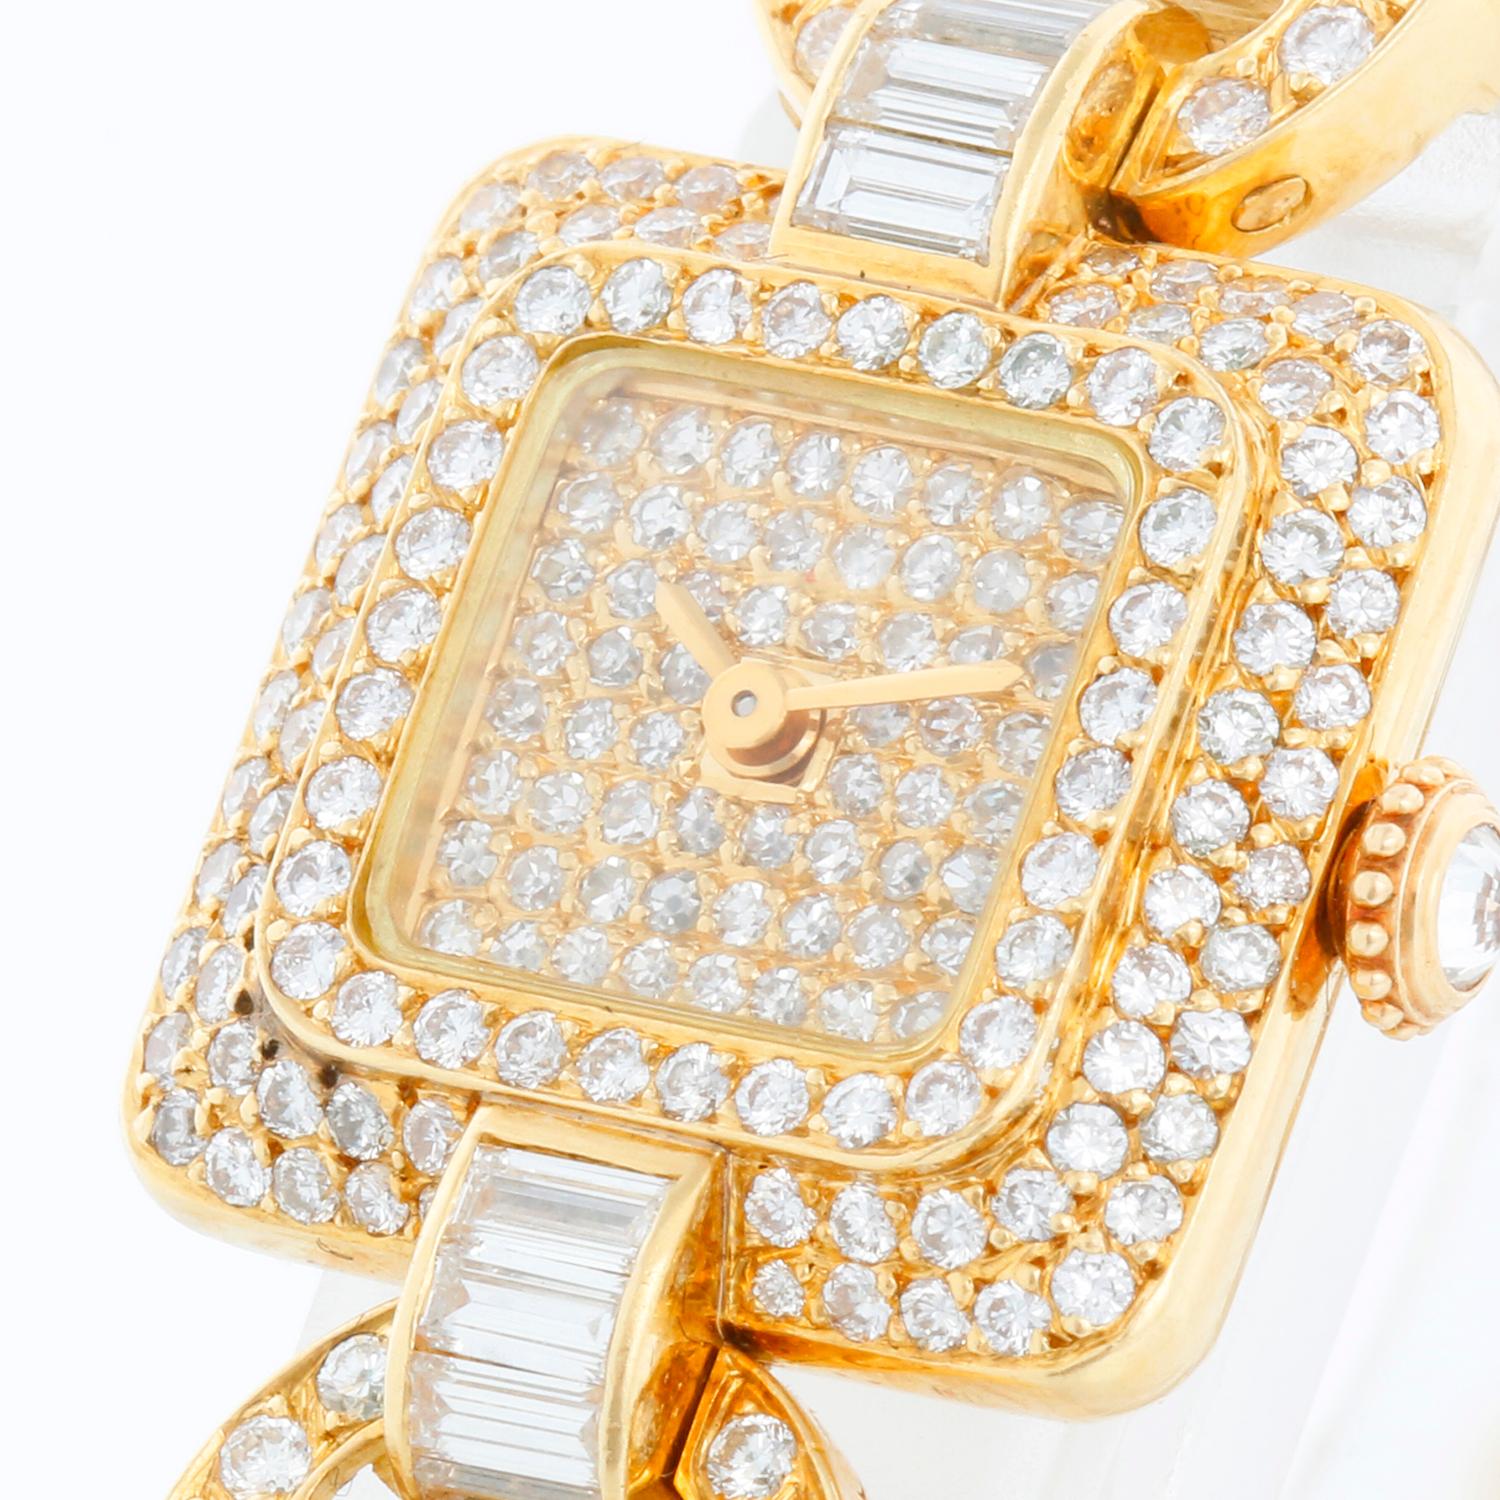 Cartier Classique Pearl & Diamond Ladies Watch  - Manual winding . 18K Yellow gold pave diamond case with baguette diamond lugs (19 x 19 mm) . Pave diamond dial . Five rows of pearls bracelet with 18K yellow gold diamond clasp; will fit a 5.5 inch